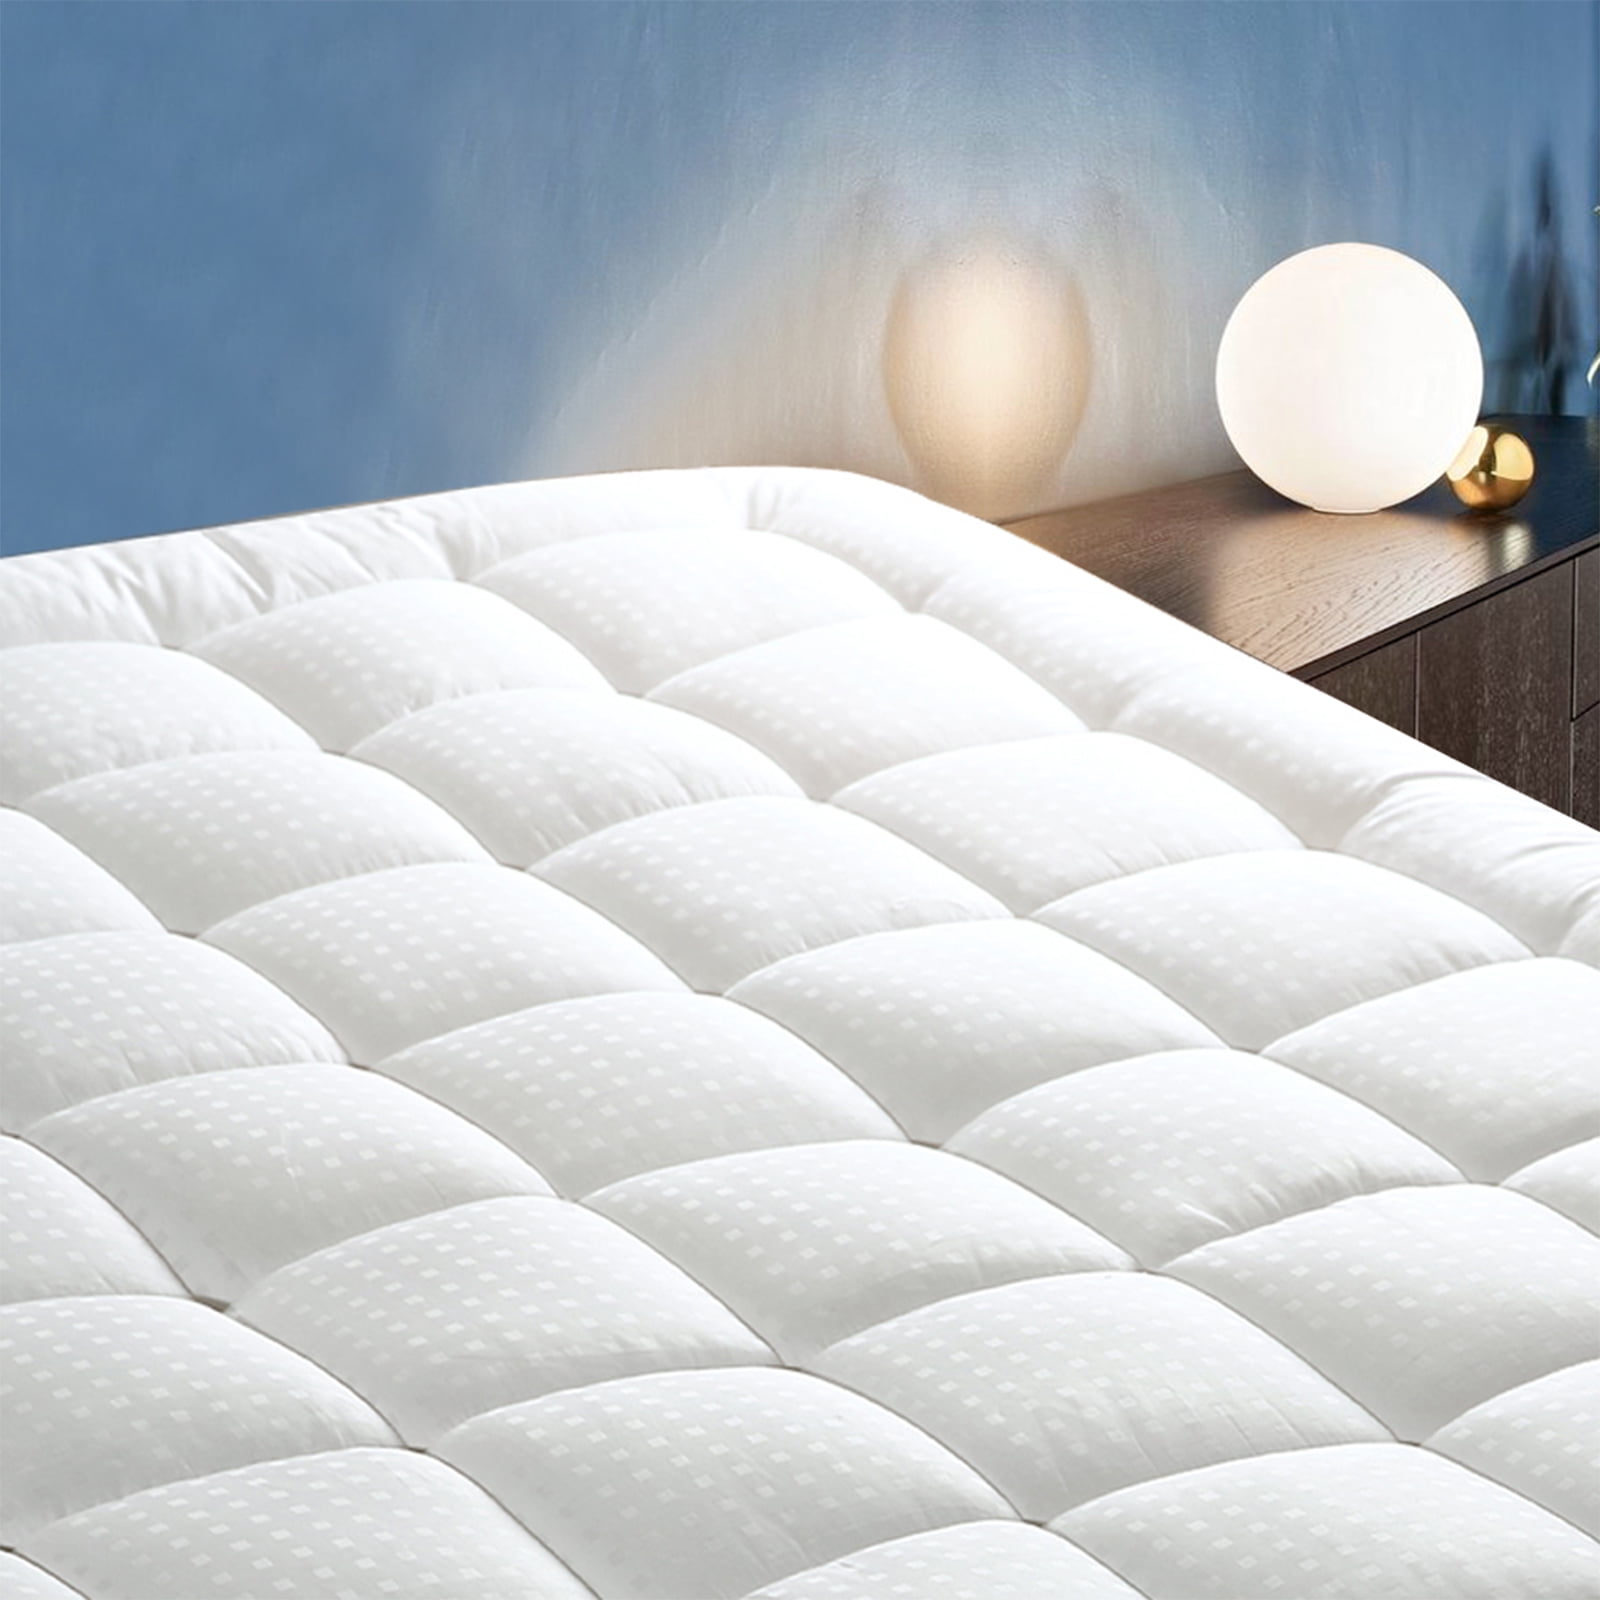 Cooling Pillow Top Mattress Pad Cover Fitted Quilted Soft Overfilled Deep Pocket 